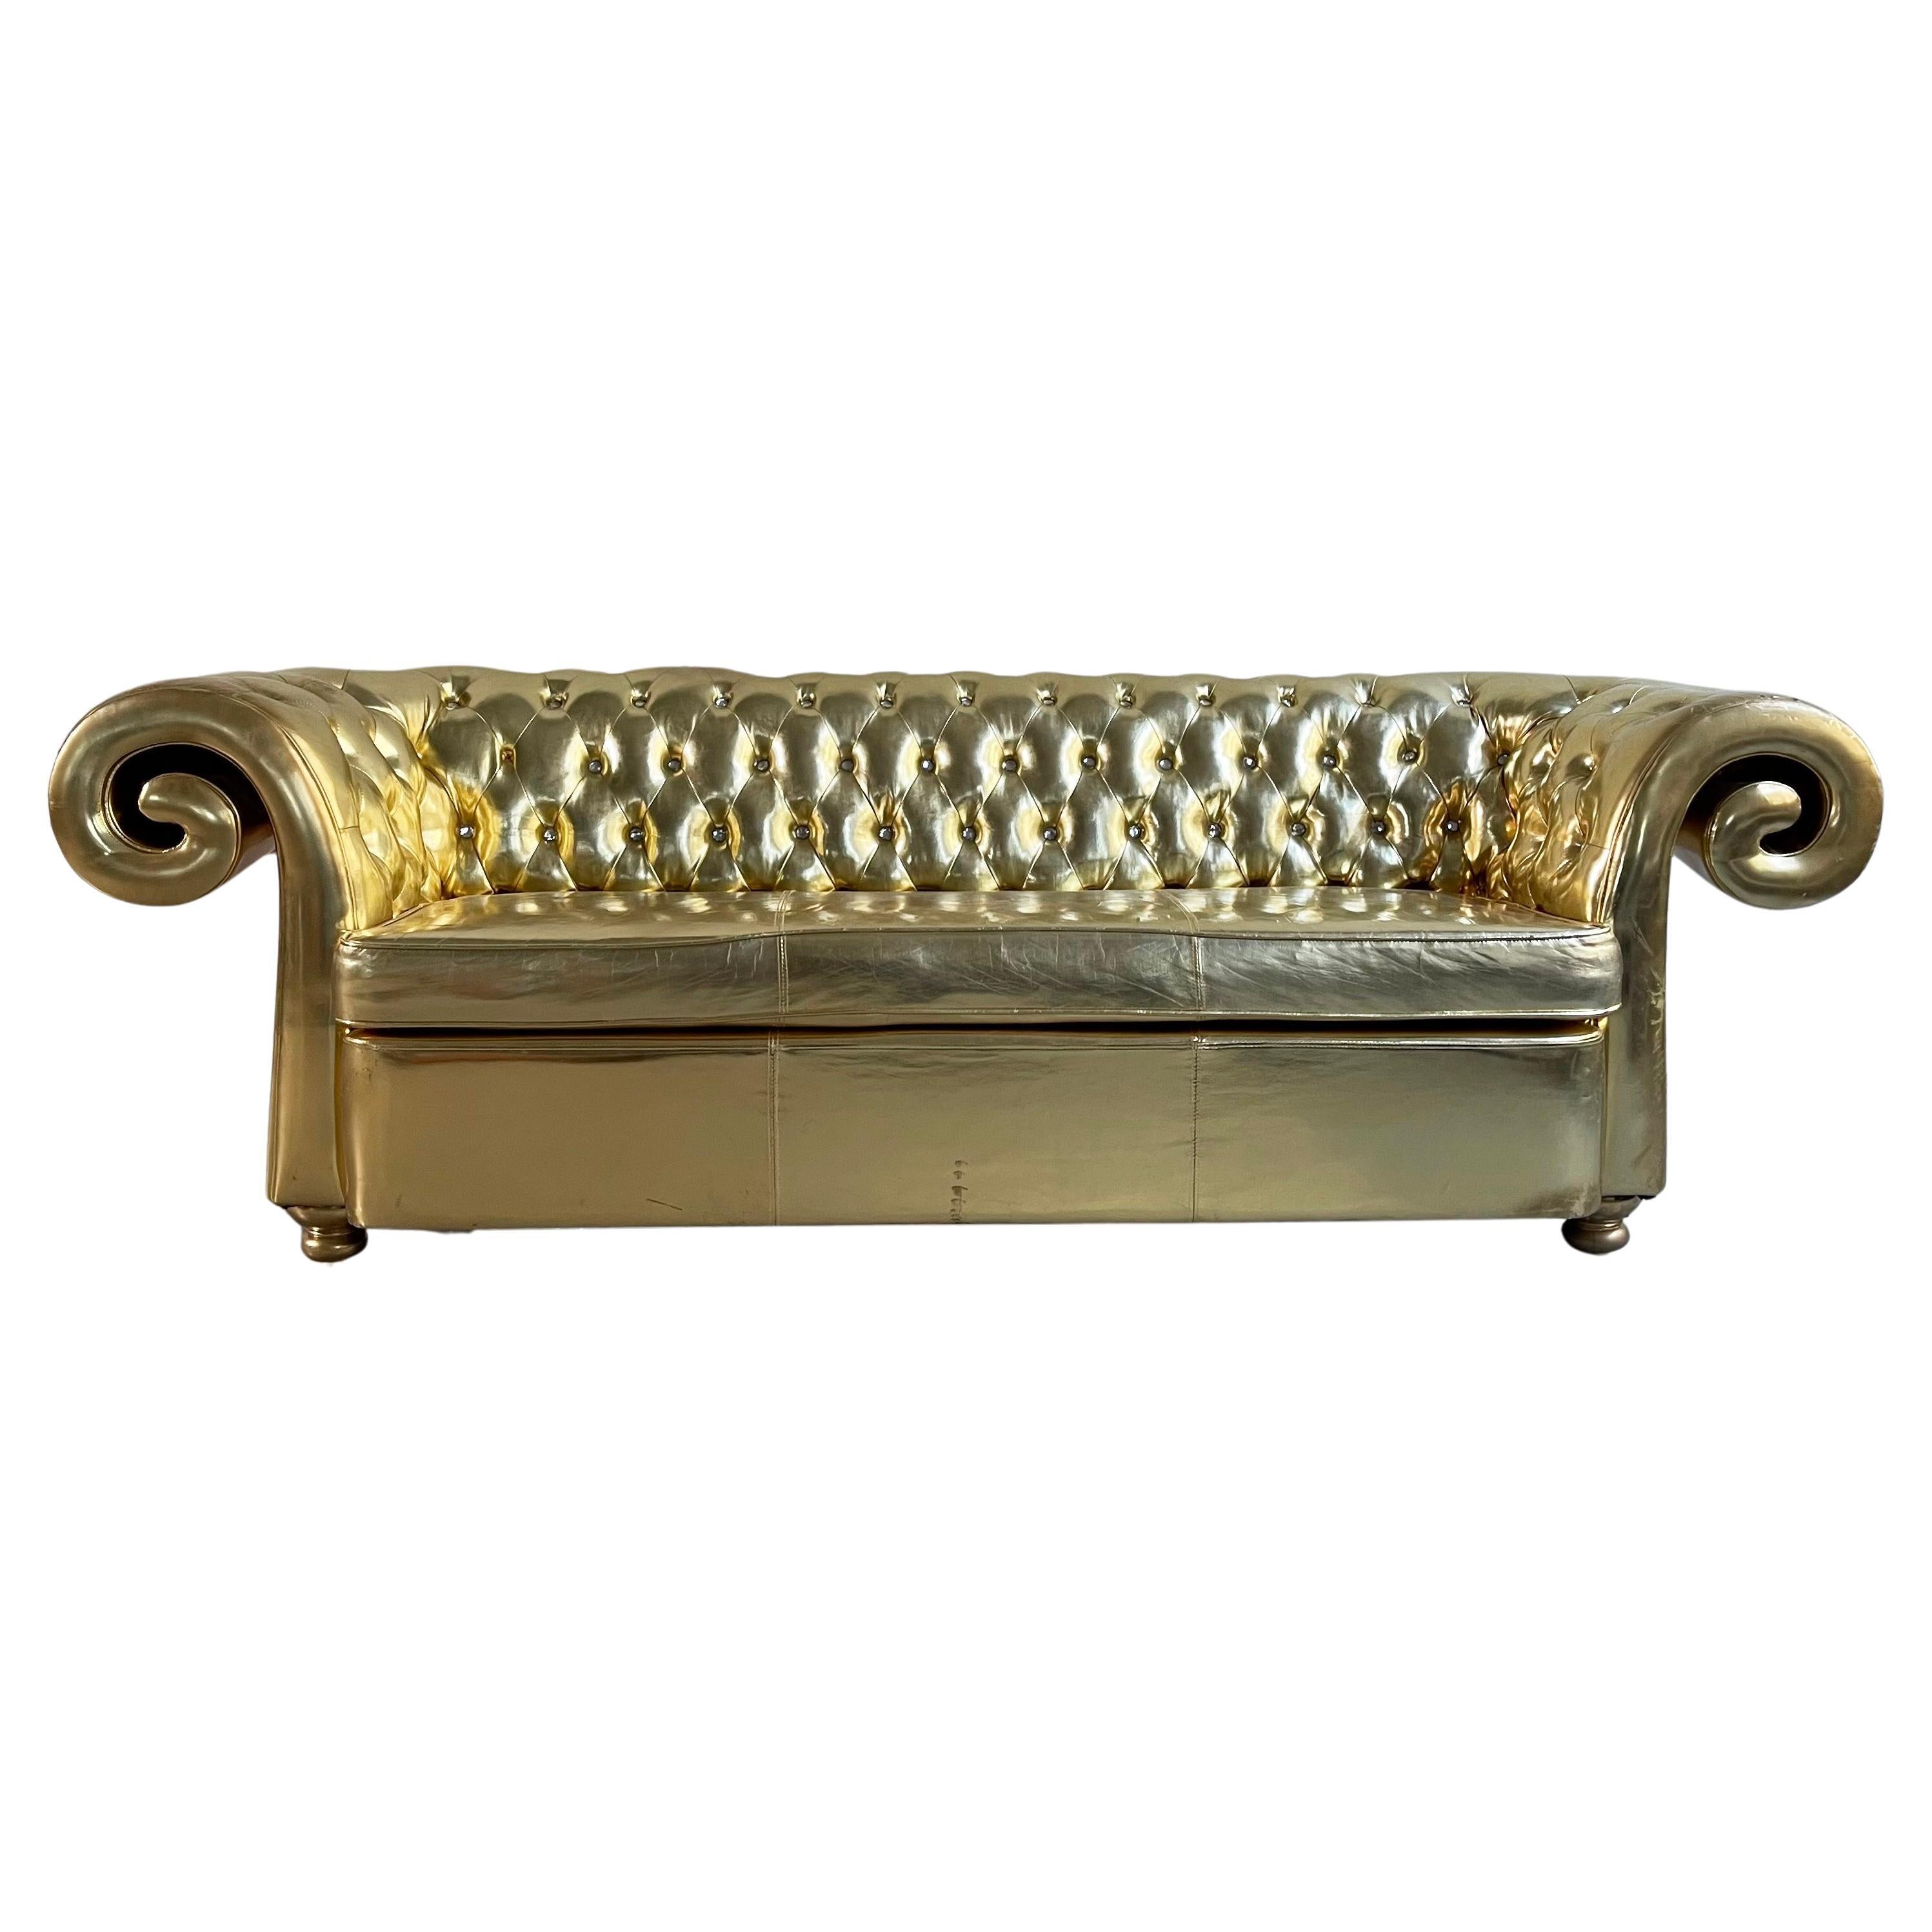 Gold Vinyl Chesterfield Sofa For Sale at 1stDibs